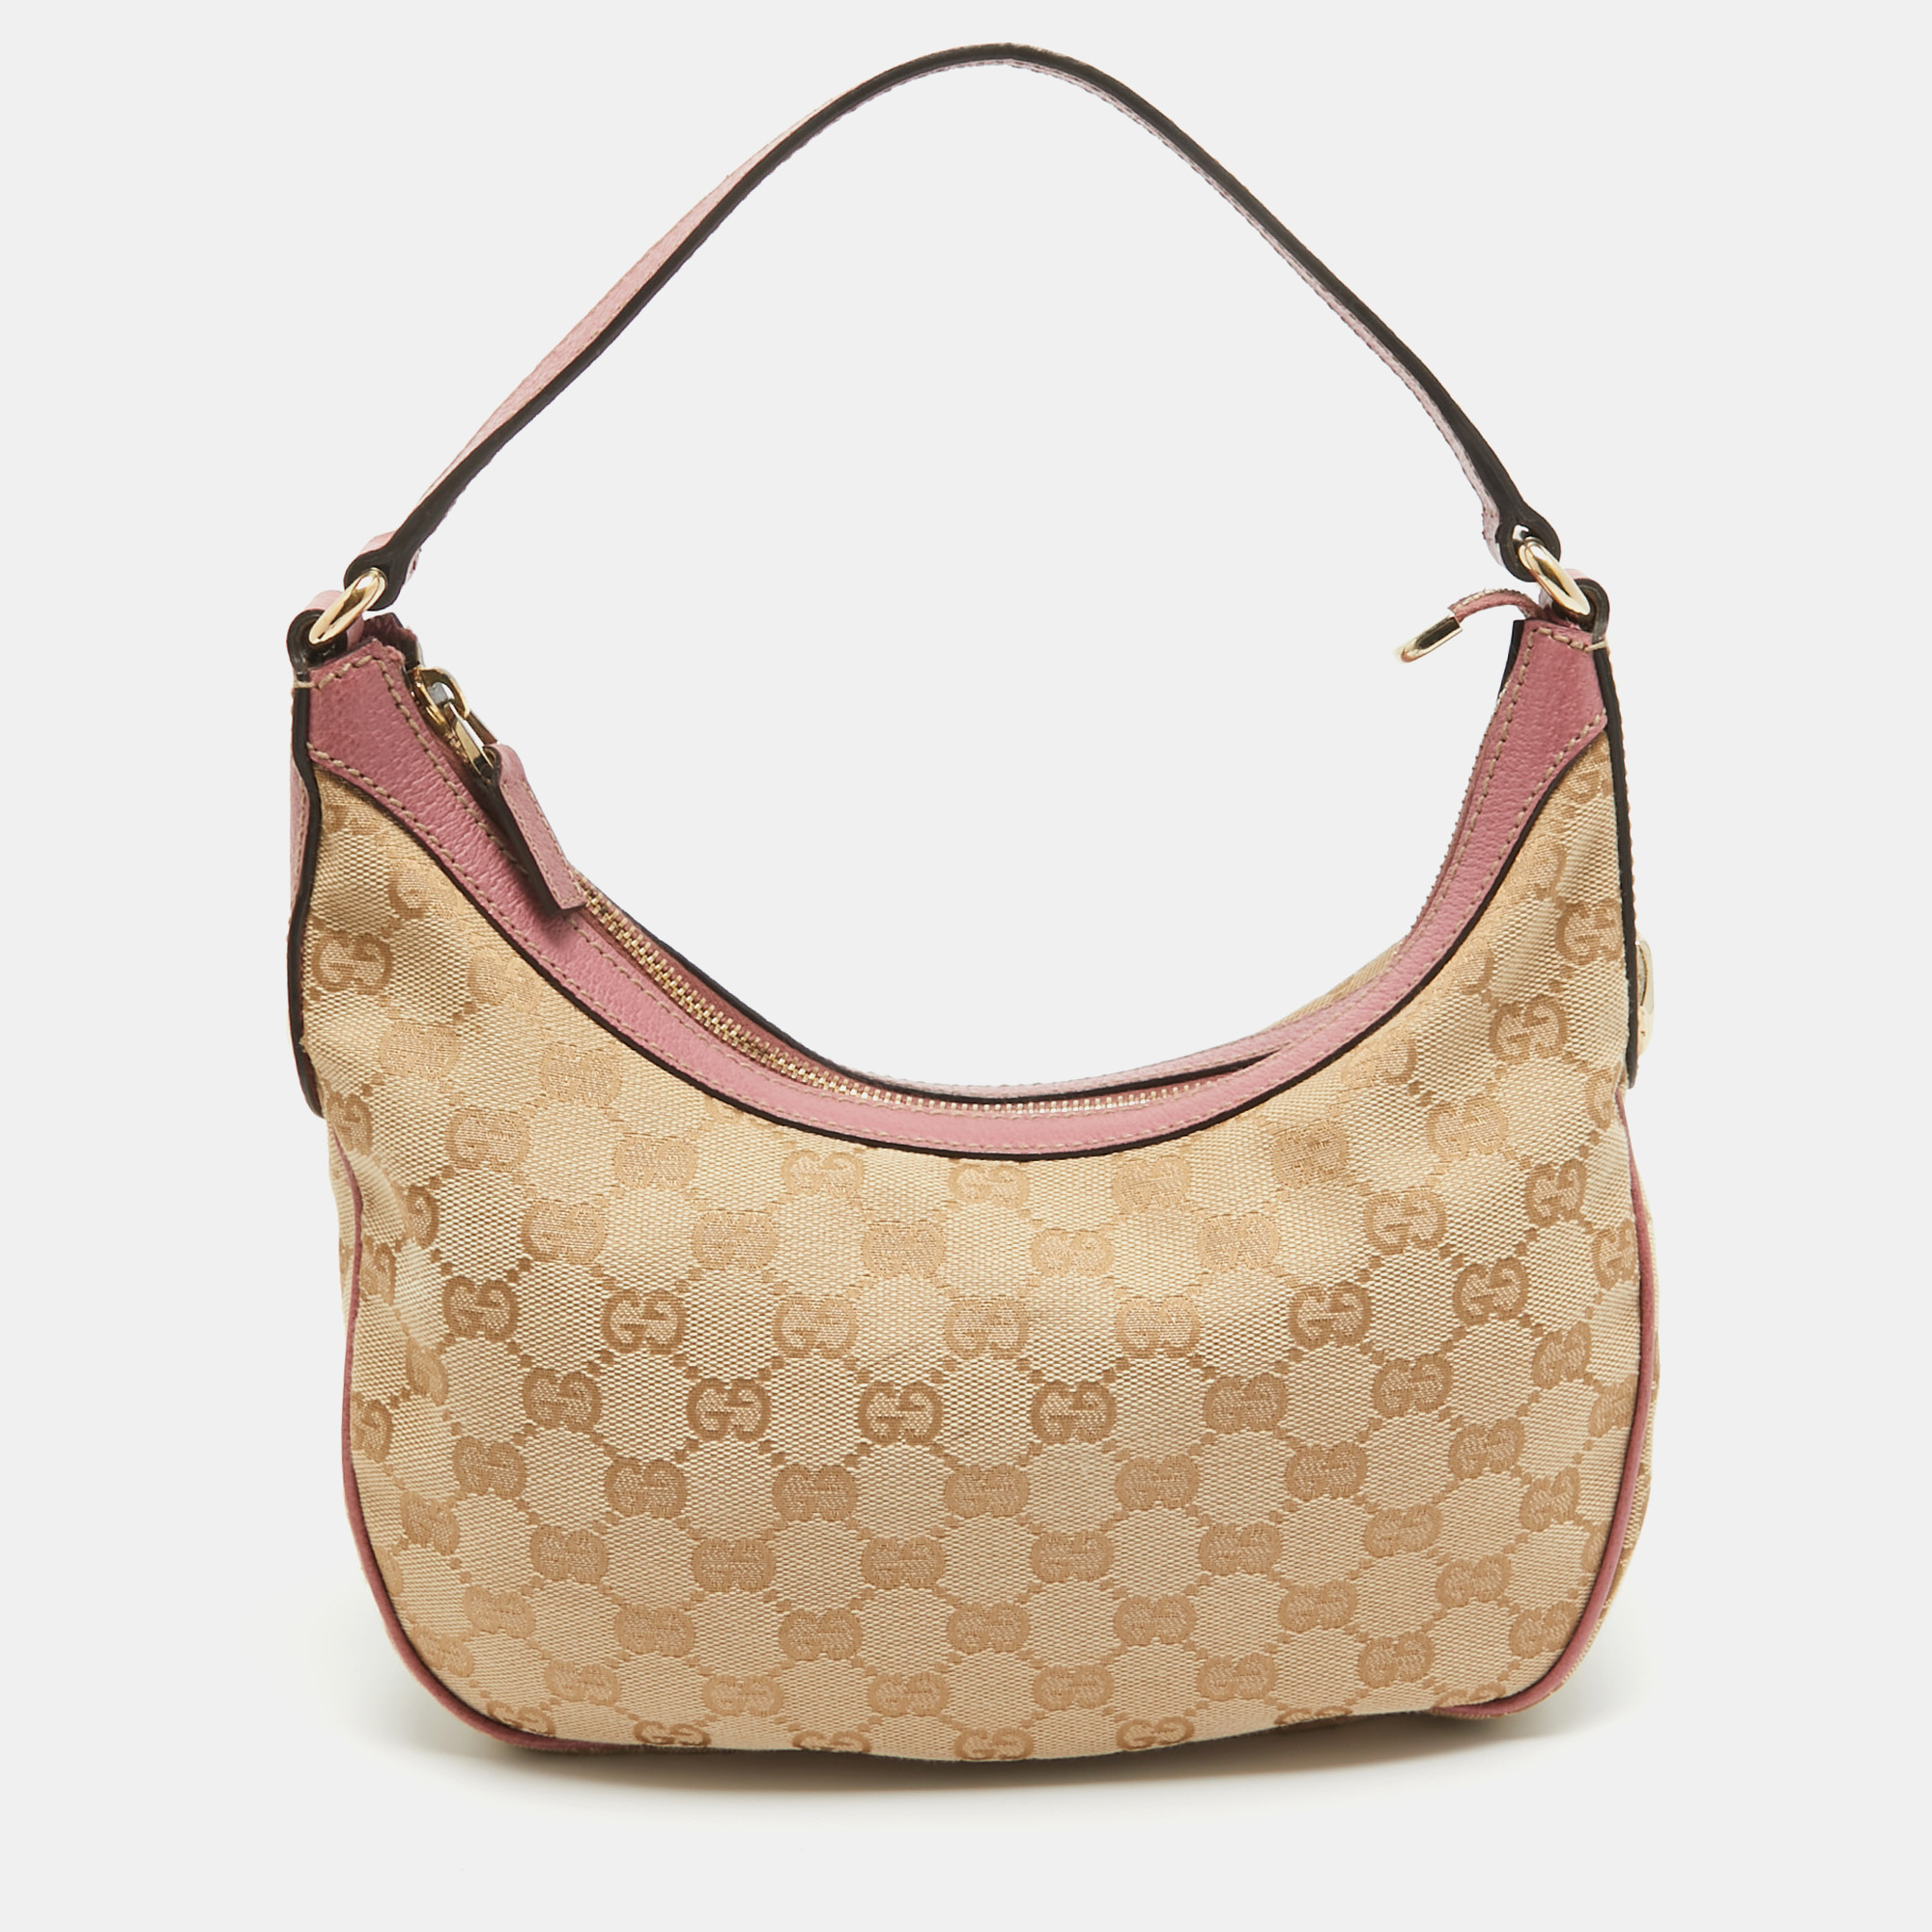 Gucci pink/beige gg canvas and leather mini hobo